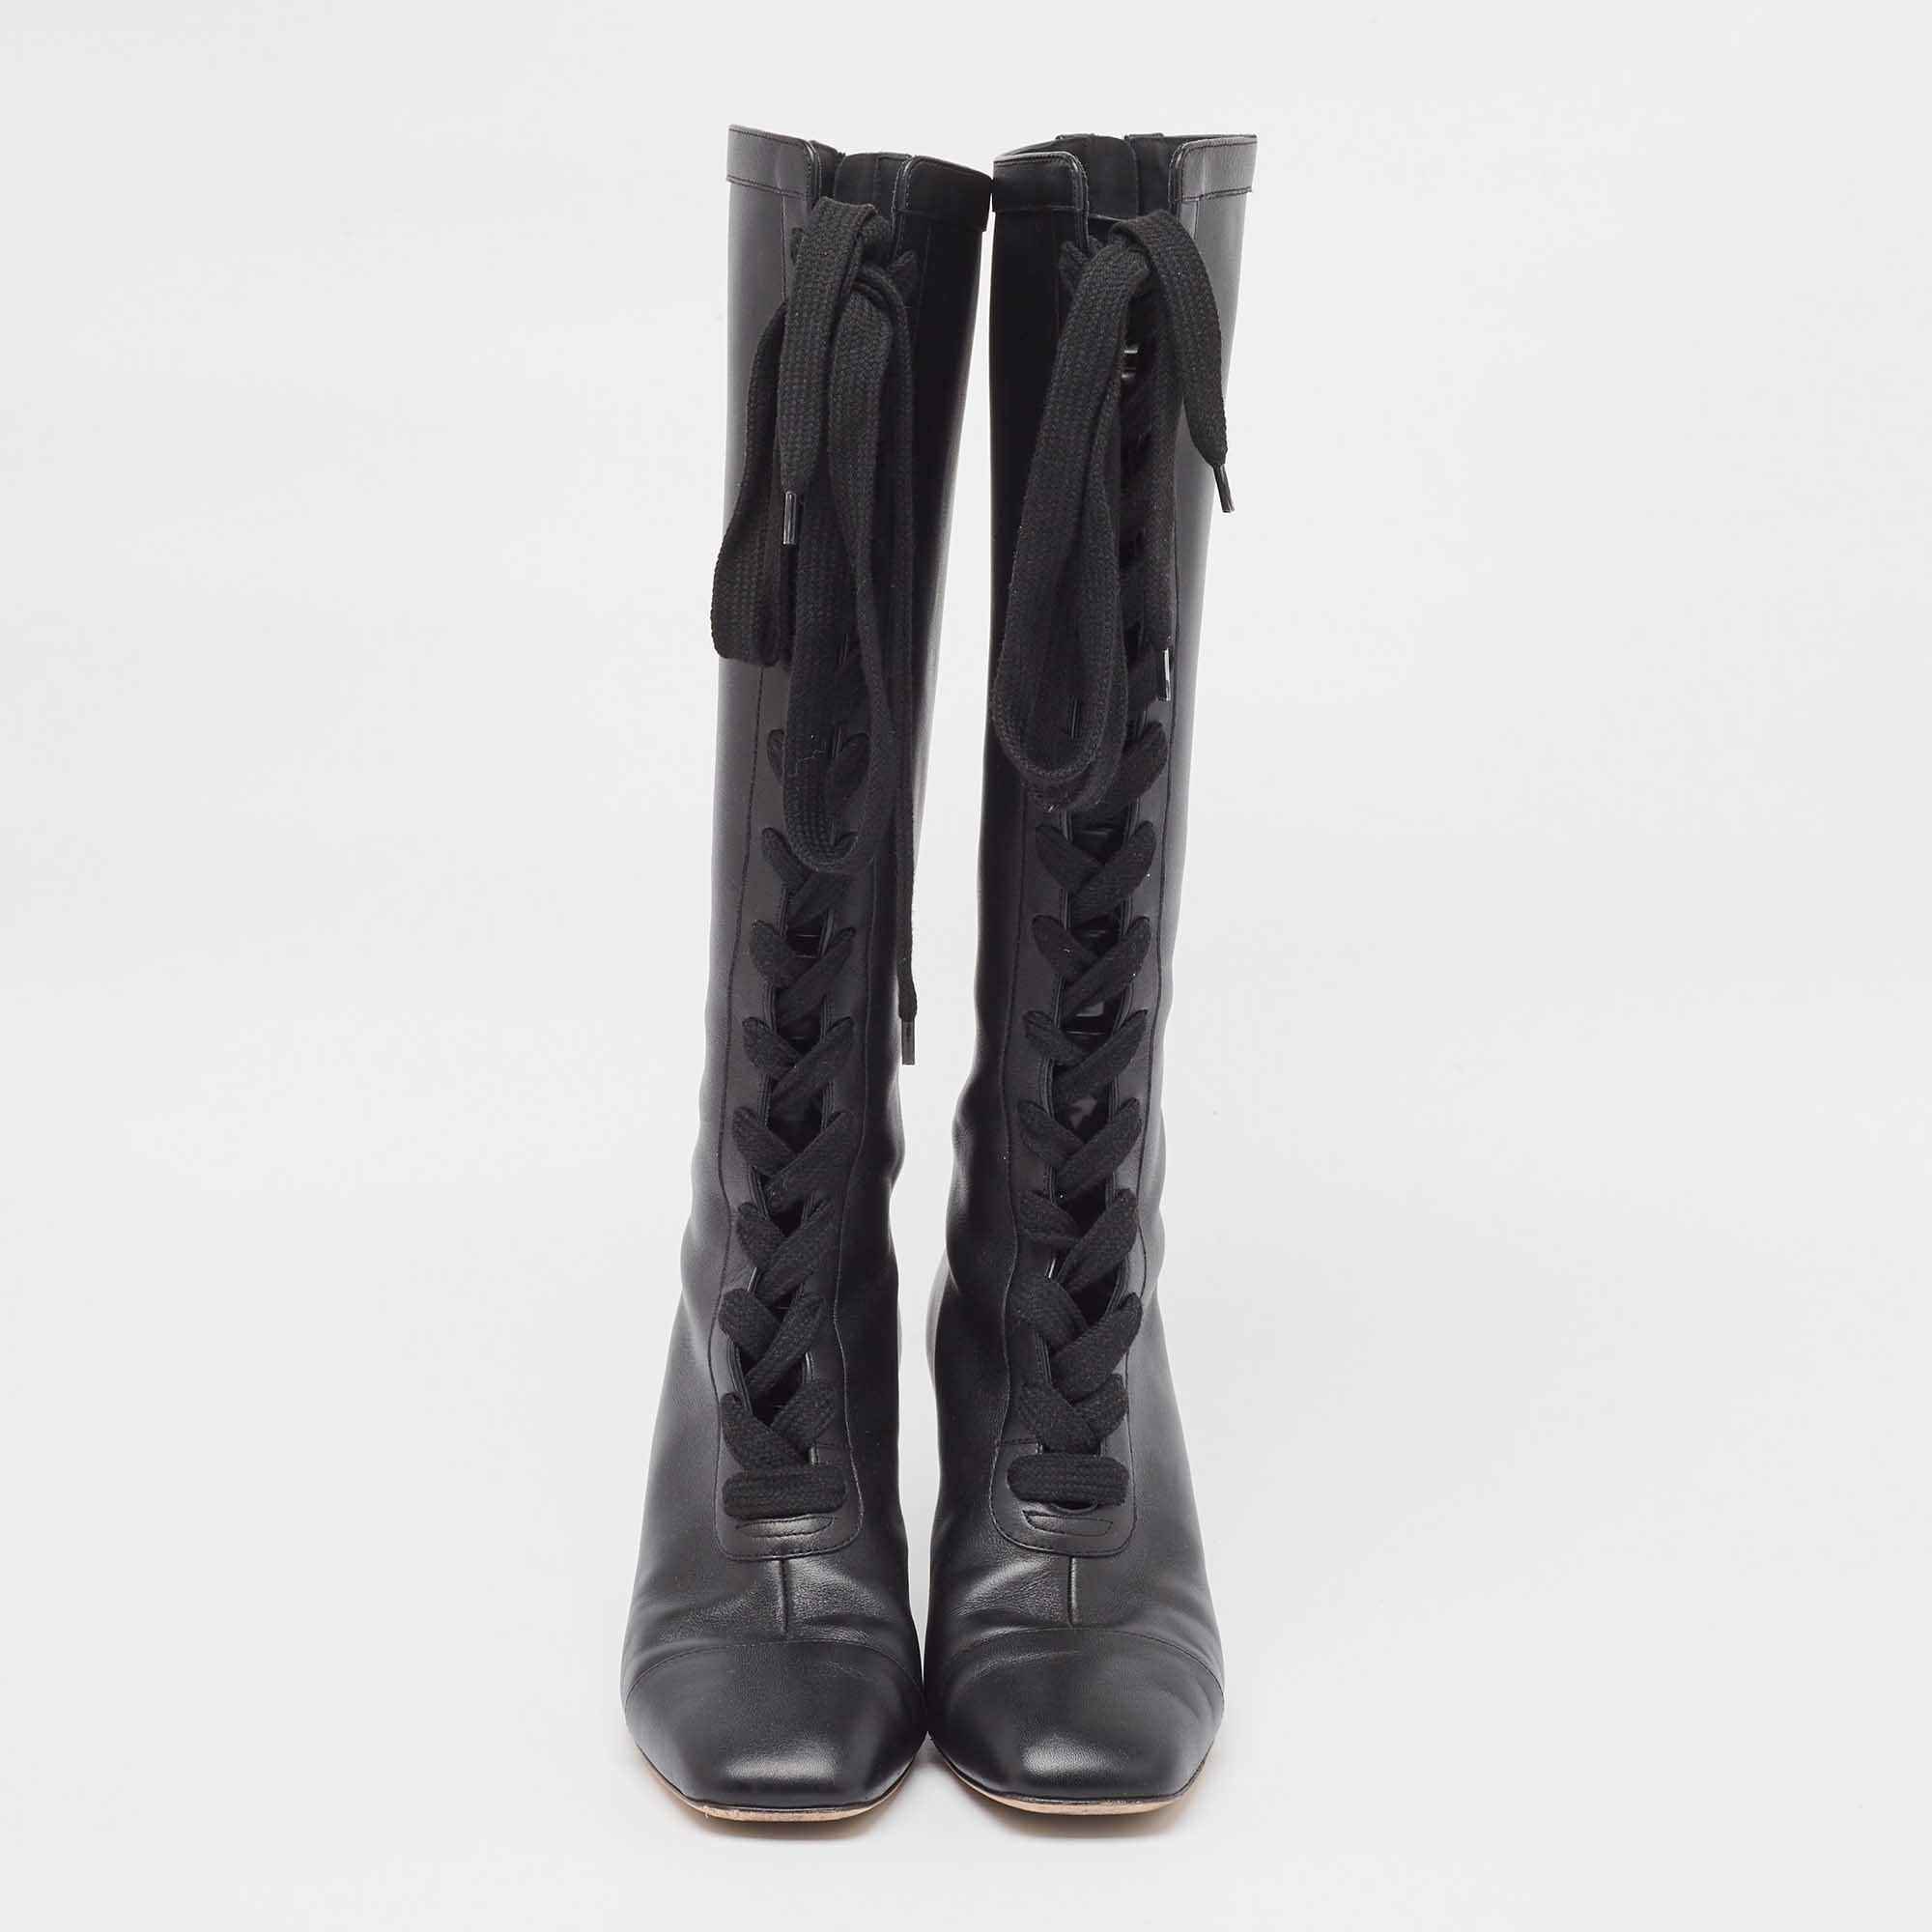 Enjoy the most fashionable days with these stylish Dior boots. Modern in design and craftsmanship, they are fashioned to keep you comfortable and chic!

Includes
Original Dustbag